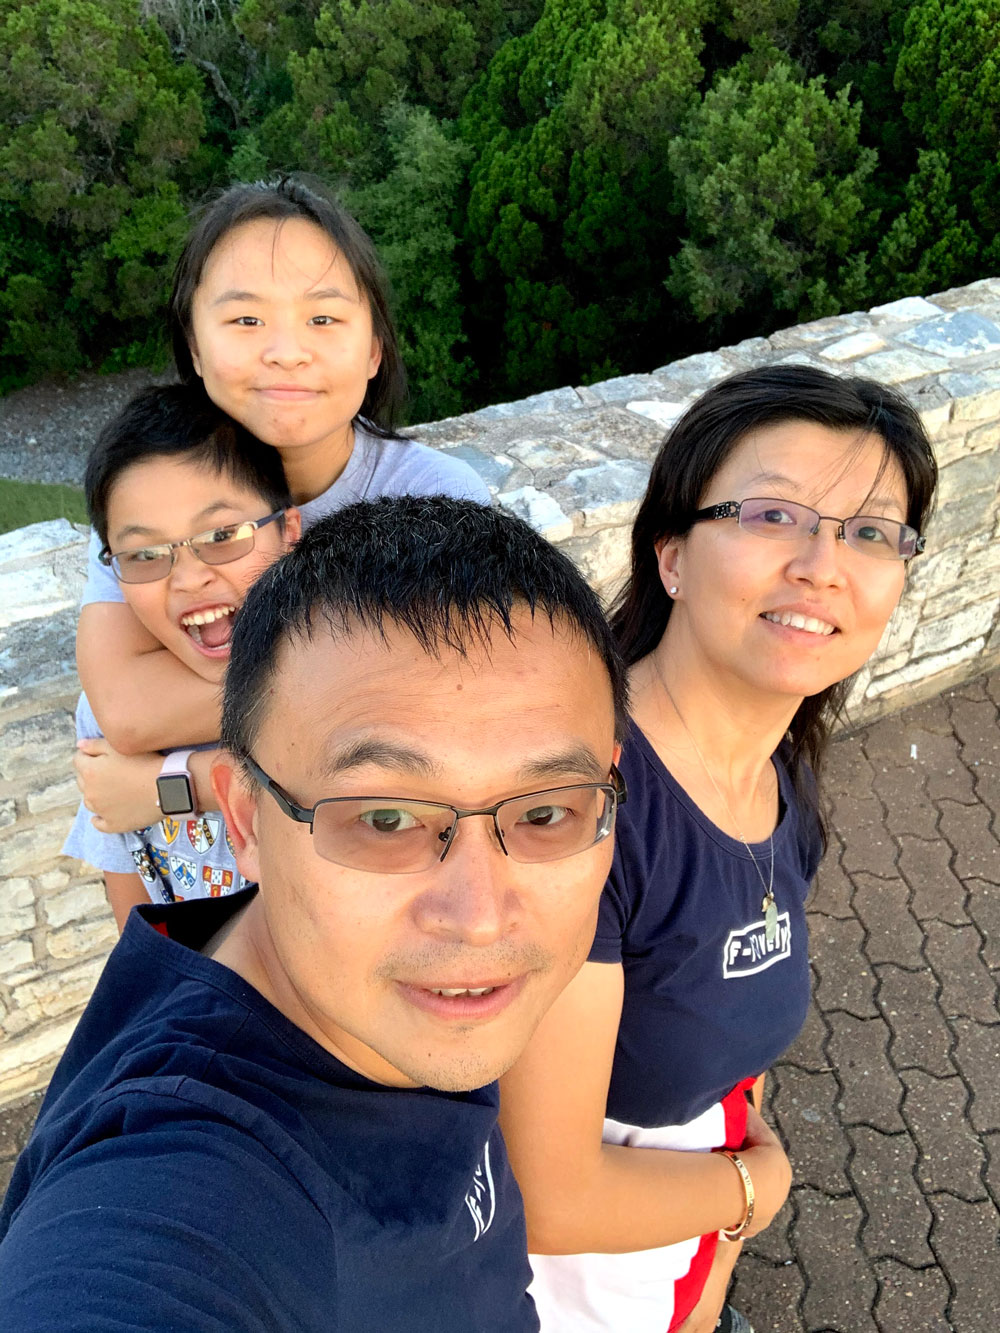 Dr. Zhou Li taking a selfie with his wife, daughter, and son while outside working out.